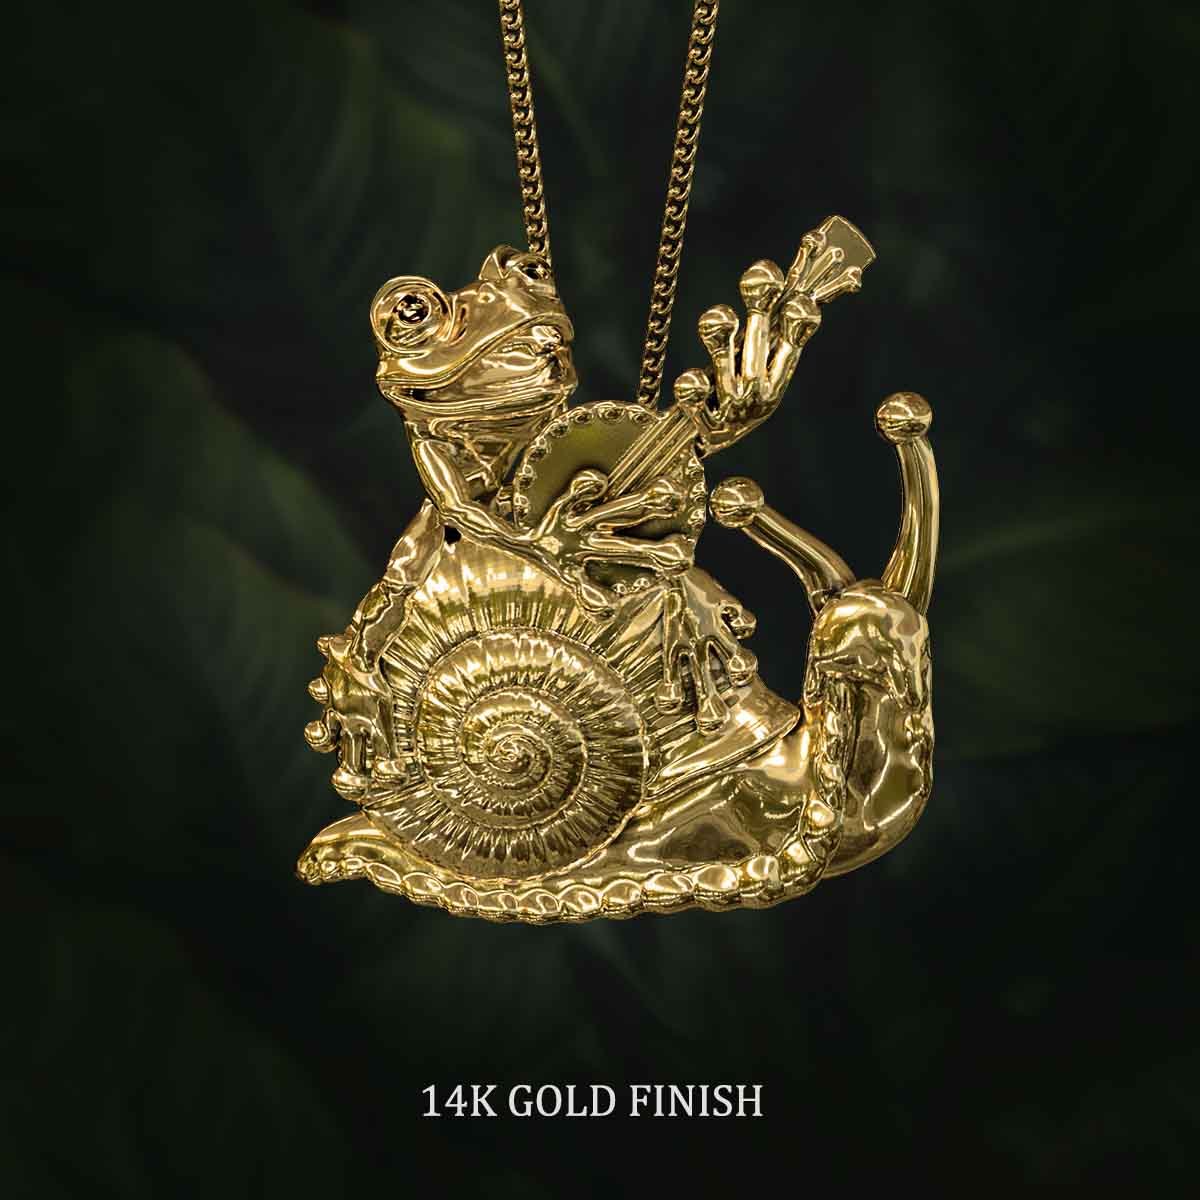     14k-Gold-Finish-Serenading-Frog-and-Snail-Pendant-Jewelry-For-Necklace